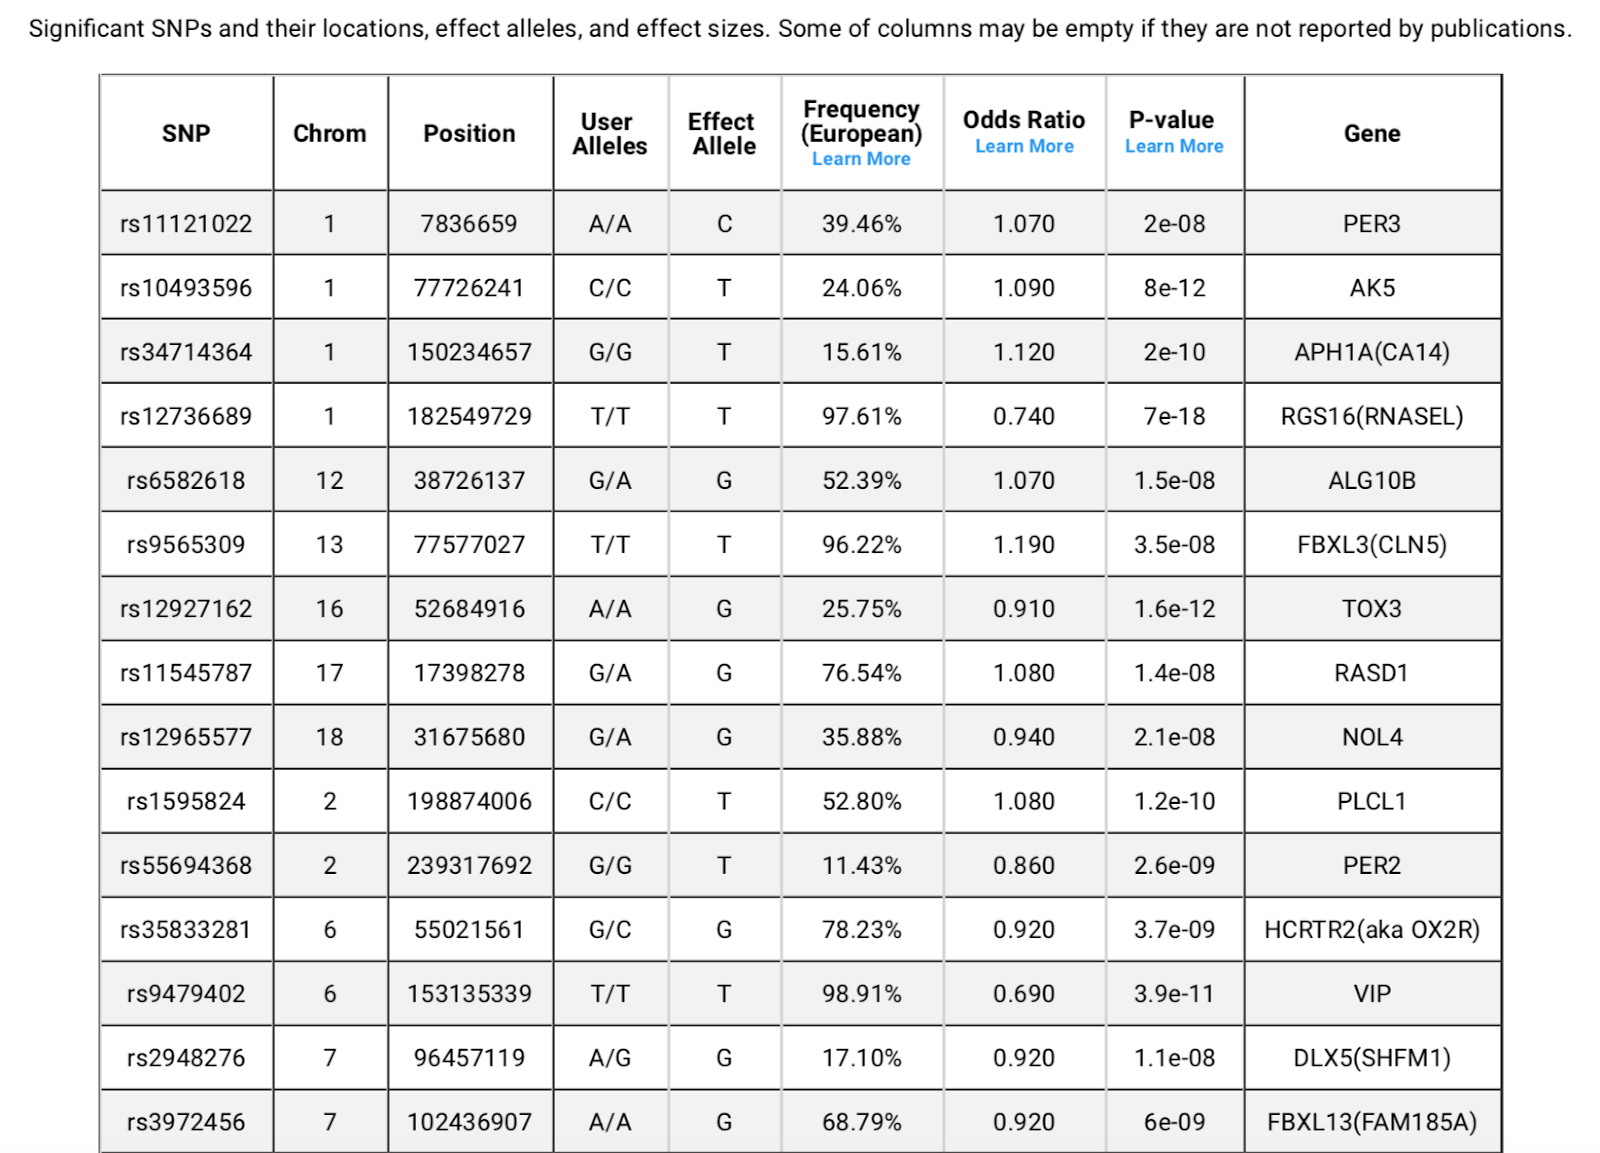 Table of 15 SNPs and their locations, effect alleles, and effect sizes among others in a DNA Land report